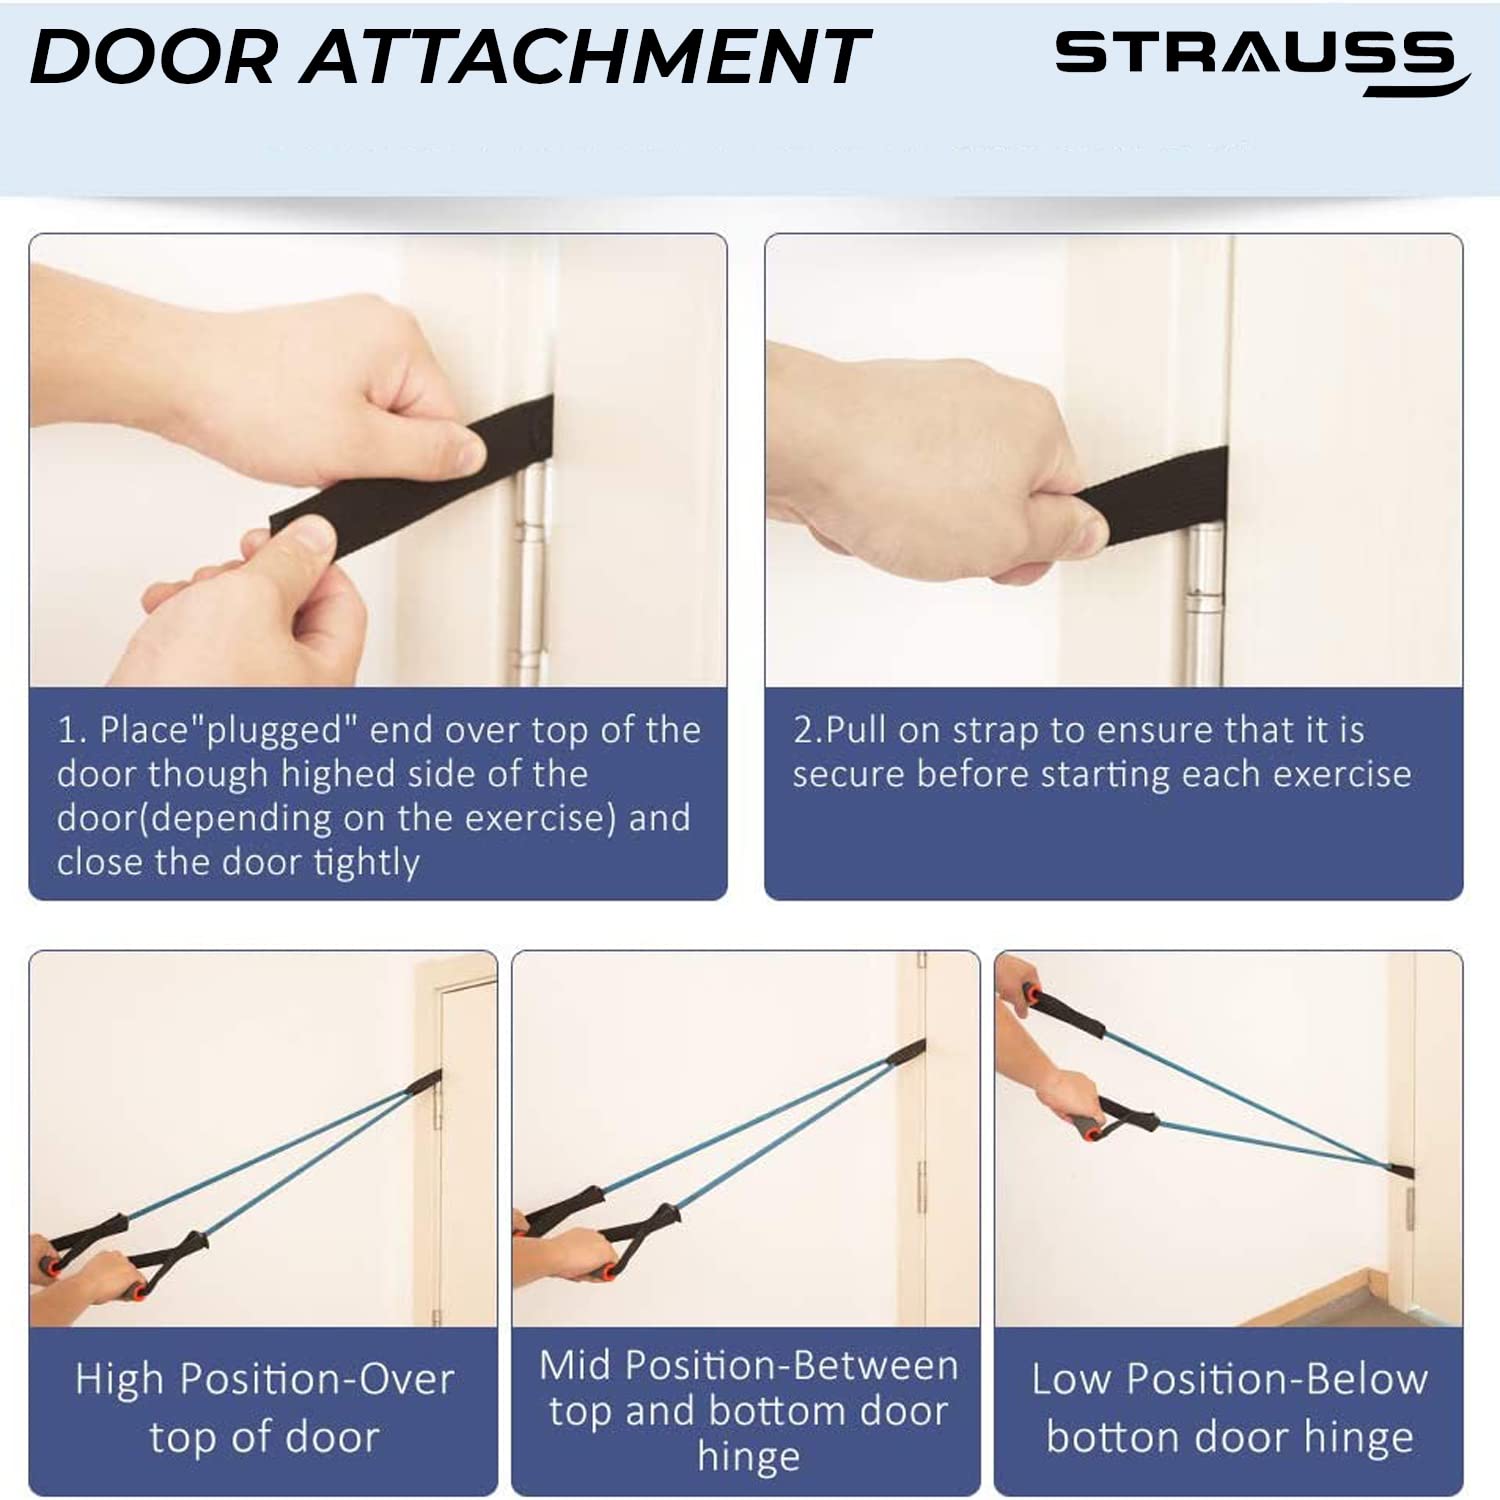 Strauss Double Resistance Tube with Foam Handles, Door Knob & Carry Bag, 27 Kg, (Black)